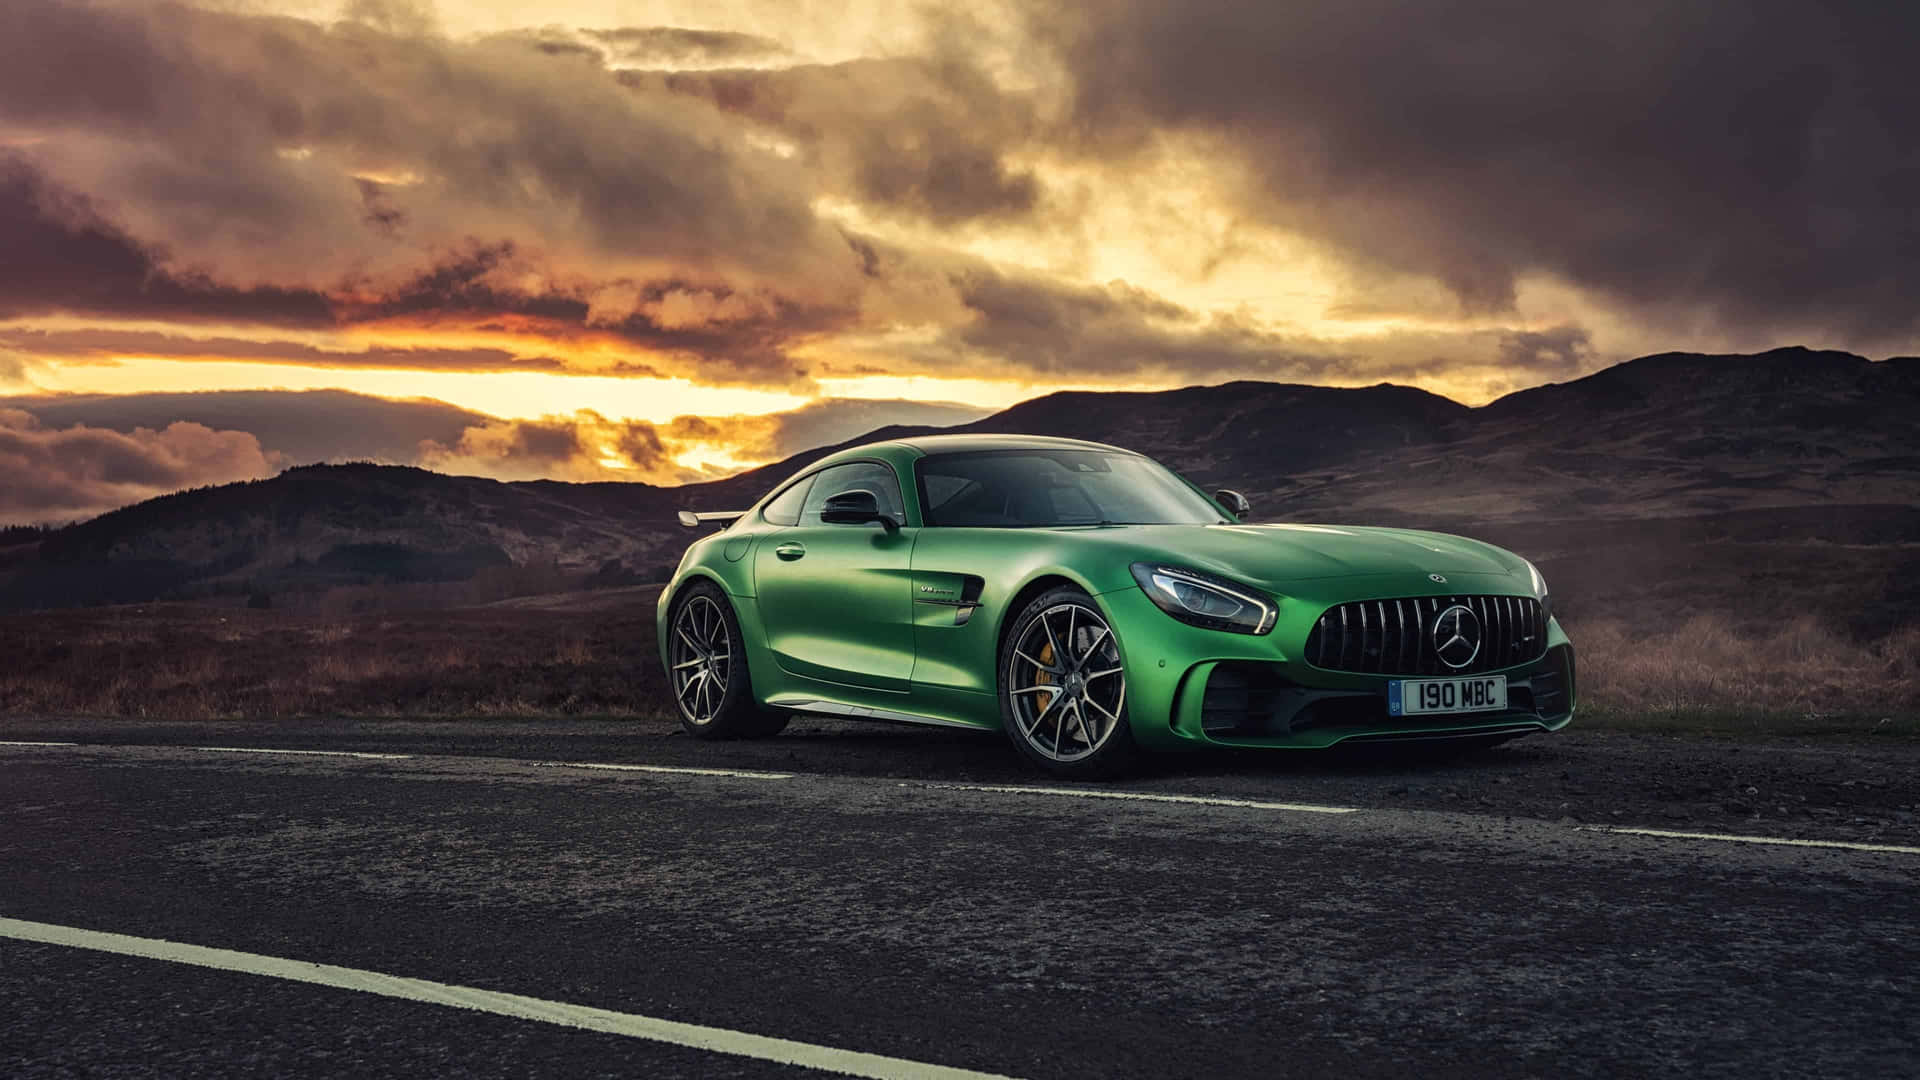 Cinematic Mercedes AMG GT R With Sky View Background